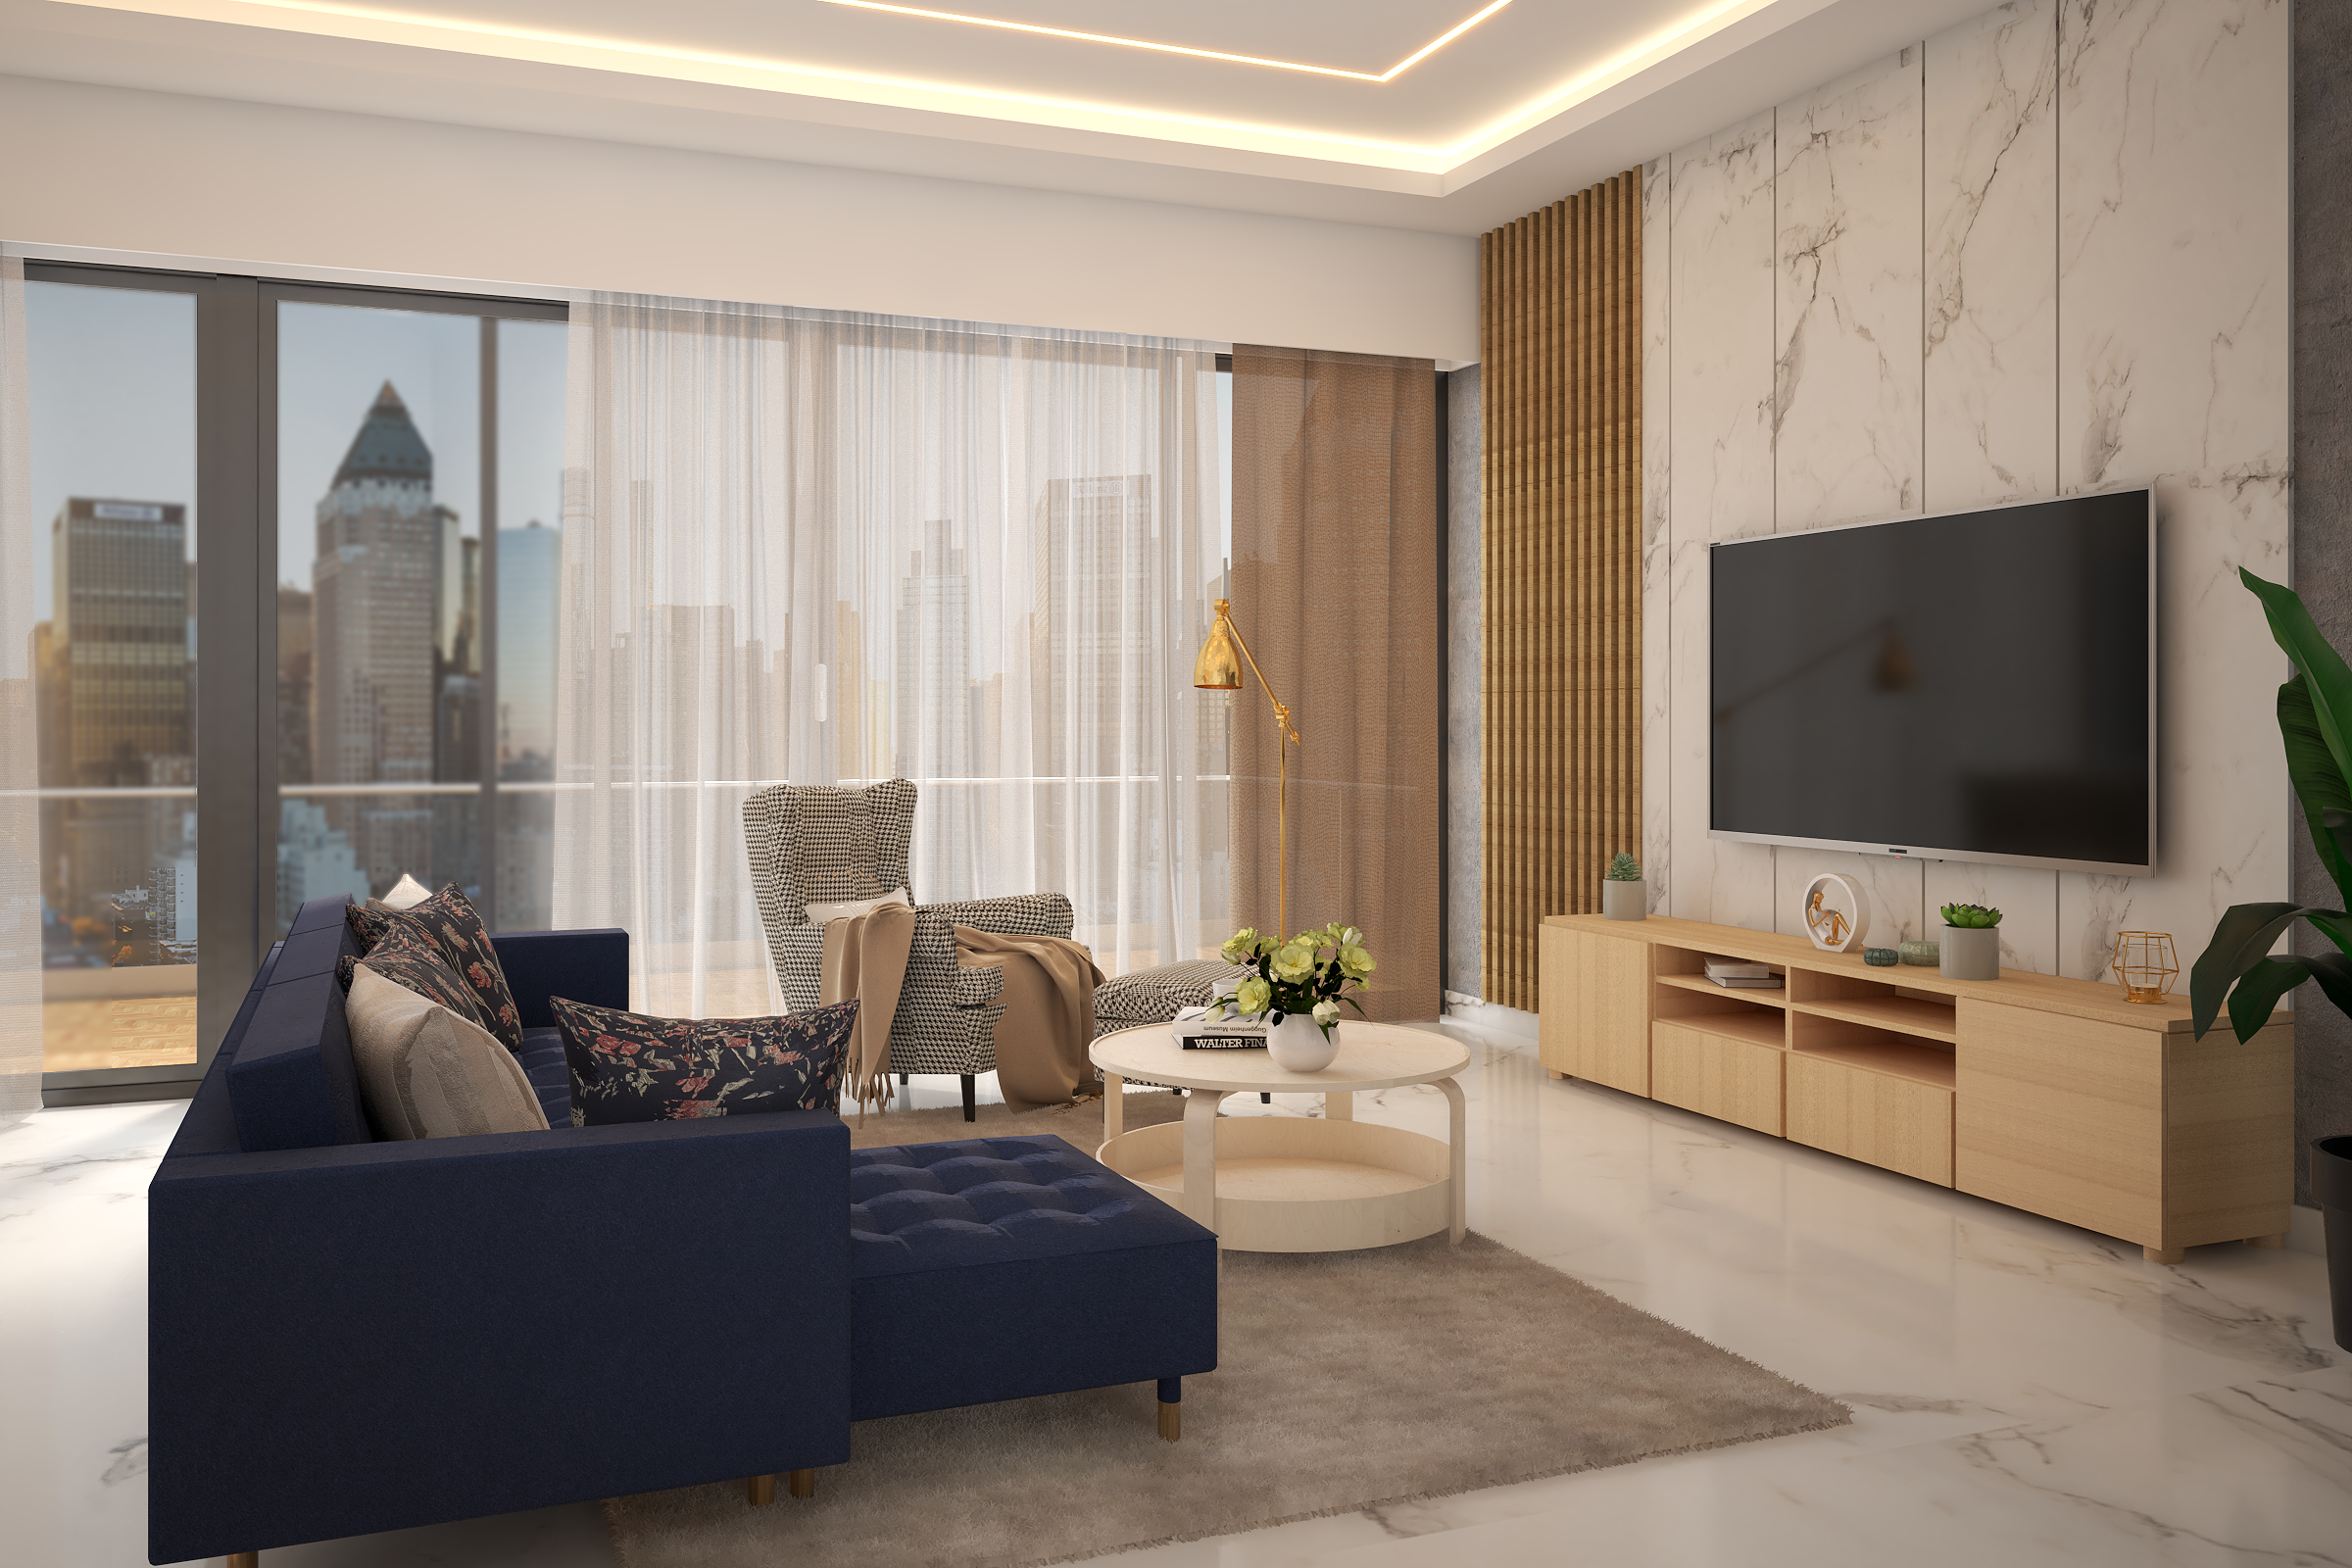 Contemporary Living Room Design With Wooden Reapers